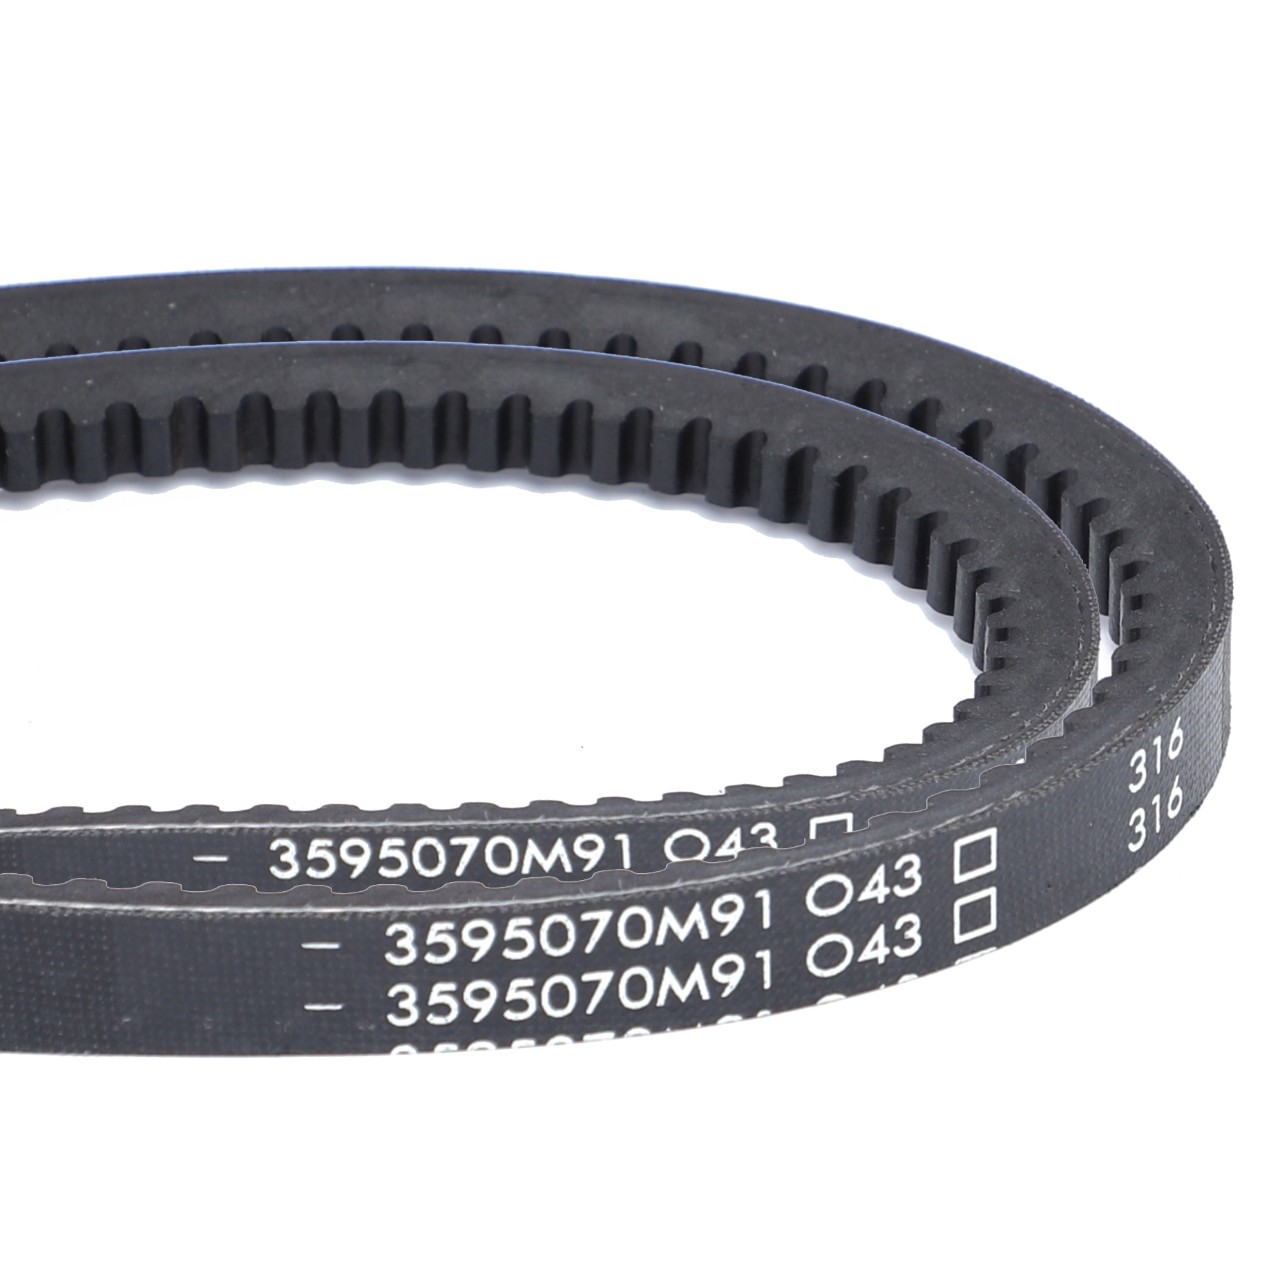 V-Belt, Sold as a Matched Pair